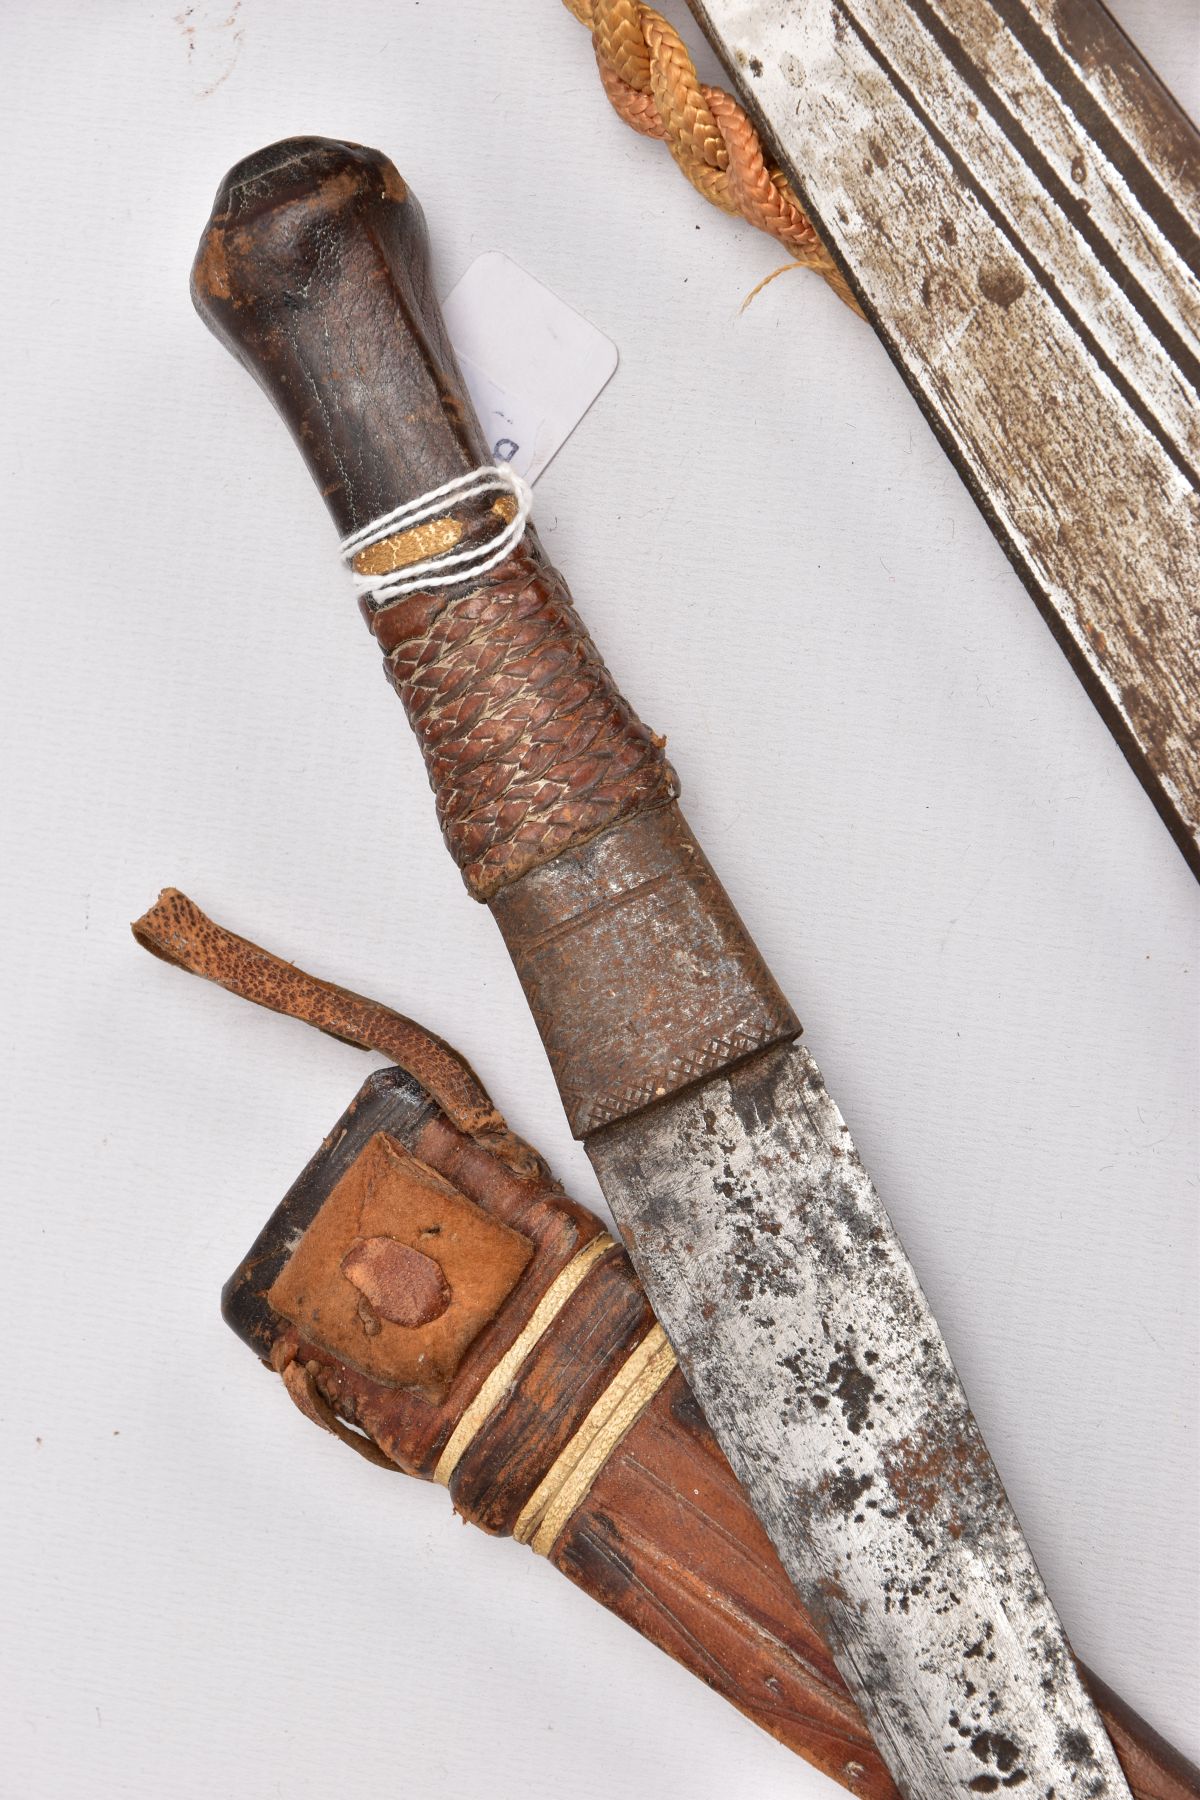 FIVE ASSORTED BLADED WEAPONS, two small short swords, curved blades, poorly constructed, knots in - Image 14 of 14